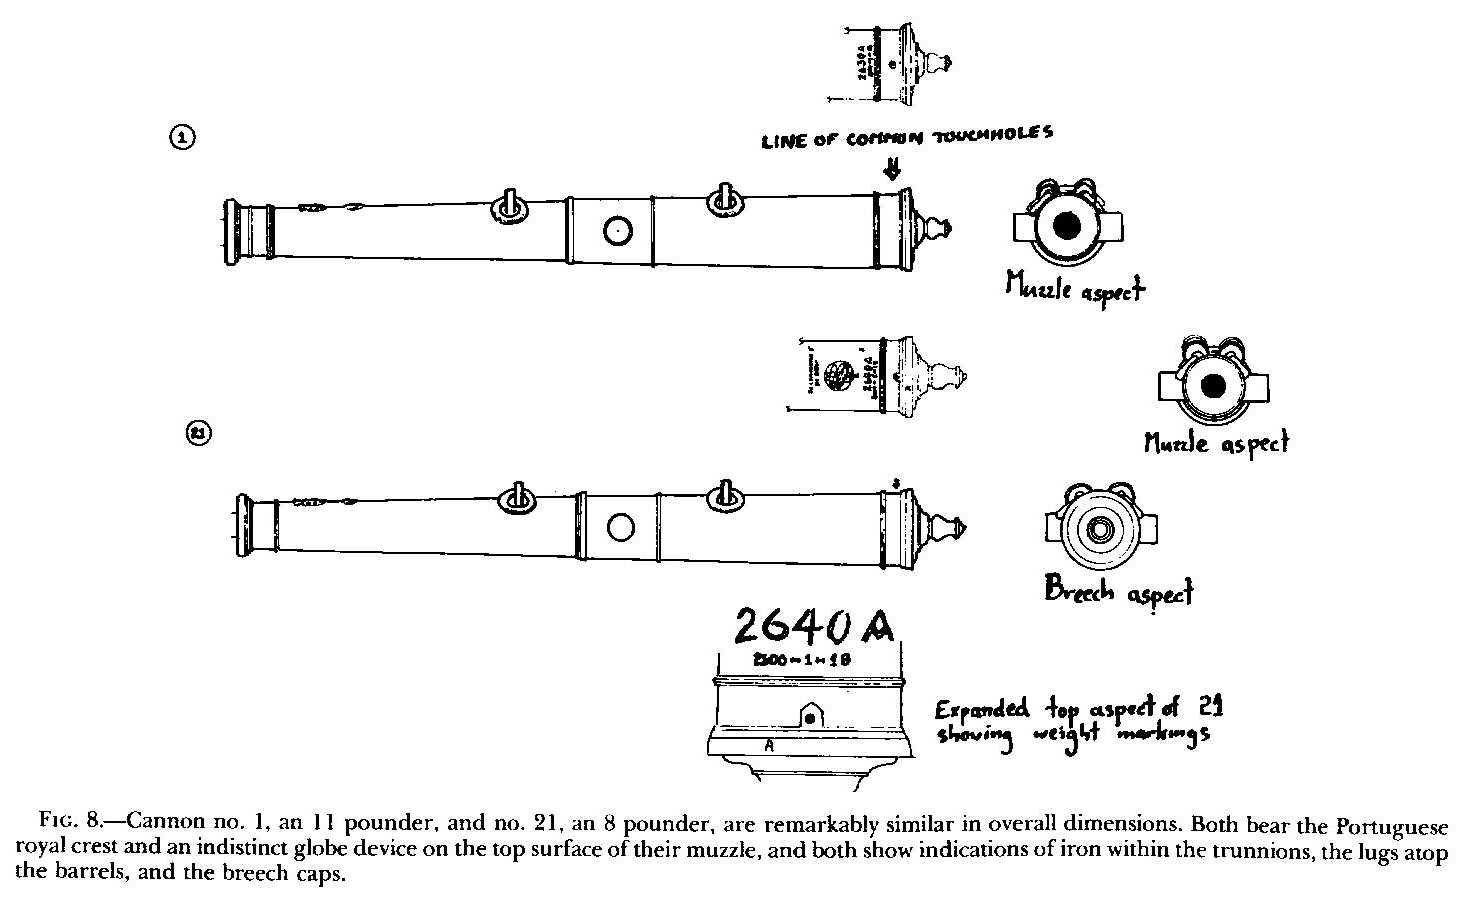 Figure 8. Cannon number 1, an 11 pounder, and number 21, an 8 pounder, are remarkably similar in overall dimensions. Both bear the Portuguese royal crest and an indistinct globe device on the top surface of their muzzle, and both show indications of iron within the trunnions, the lugs atop the barrels, and the breech caps.